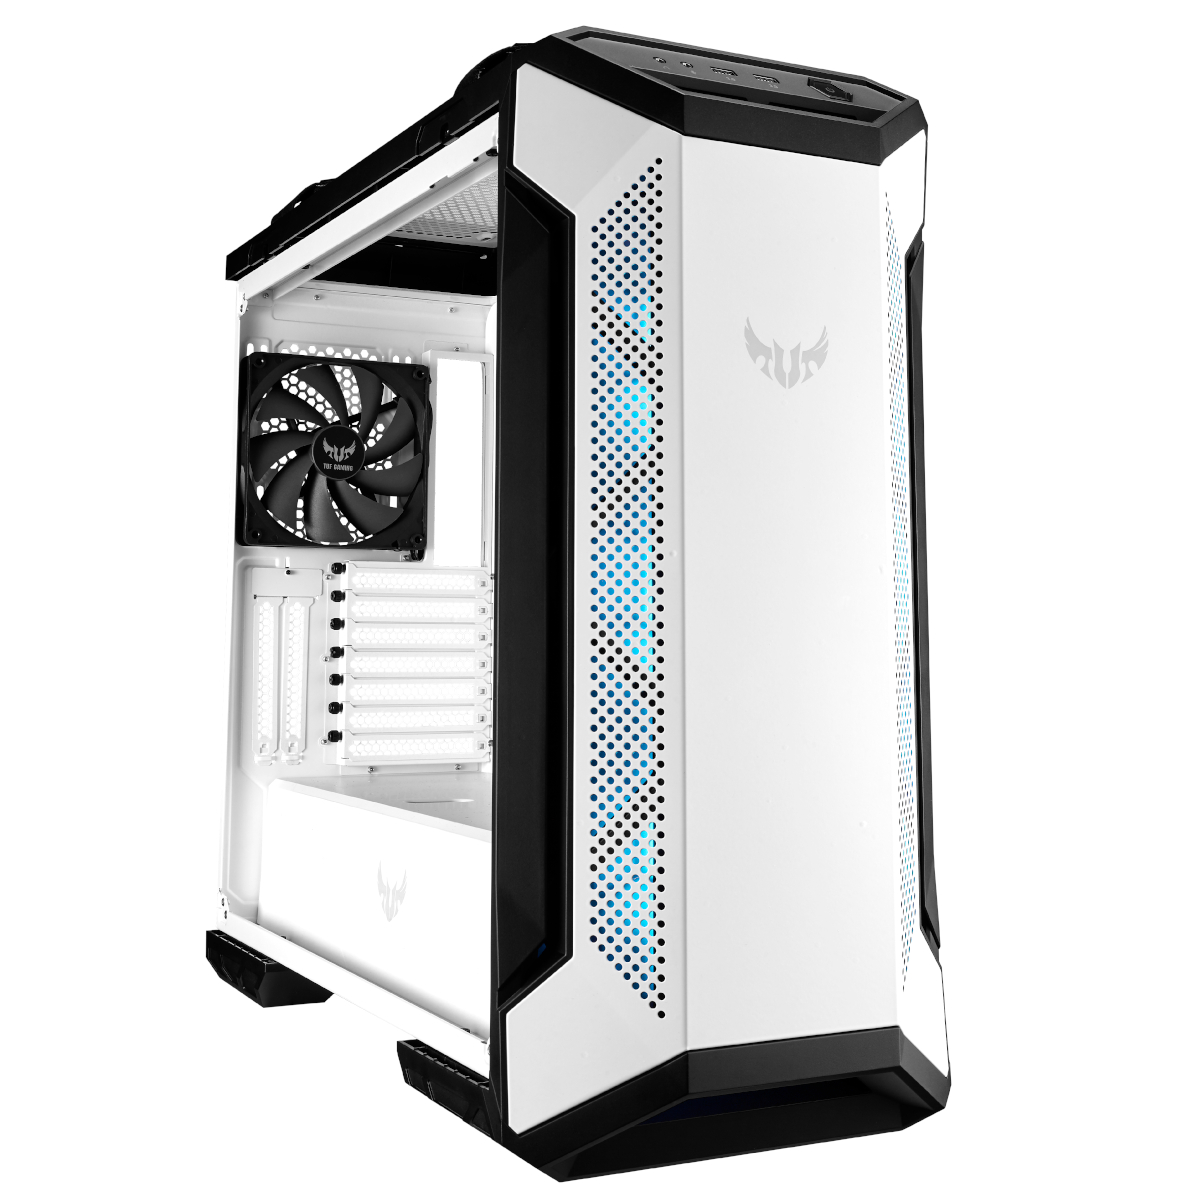 Asus - ASUS TUF Gaming GT501 Midi-Tower Case - White Tempered Glass